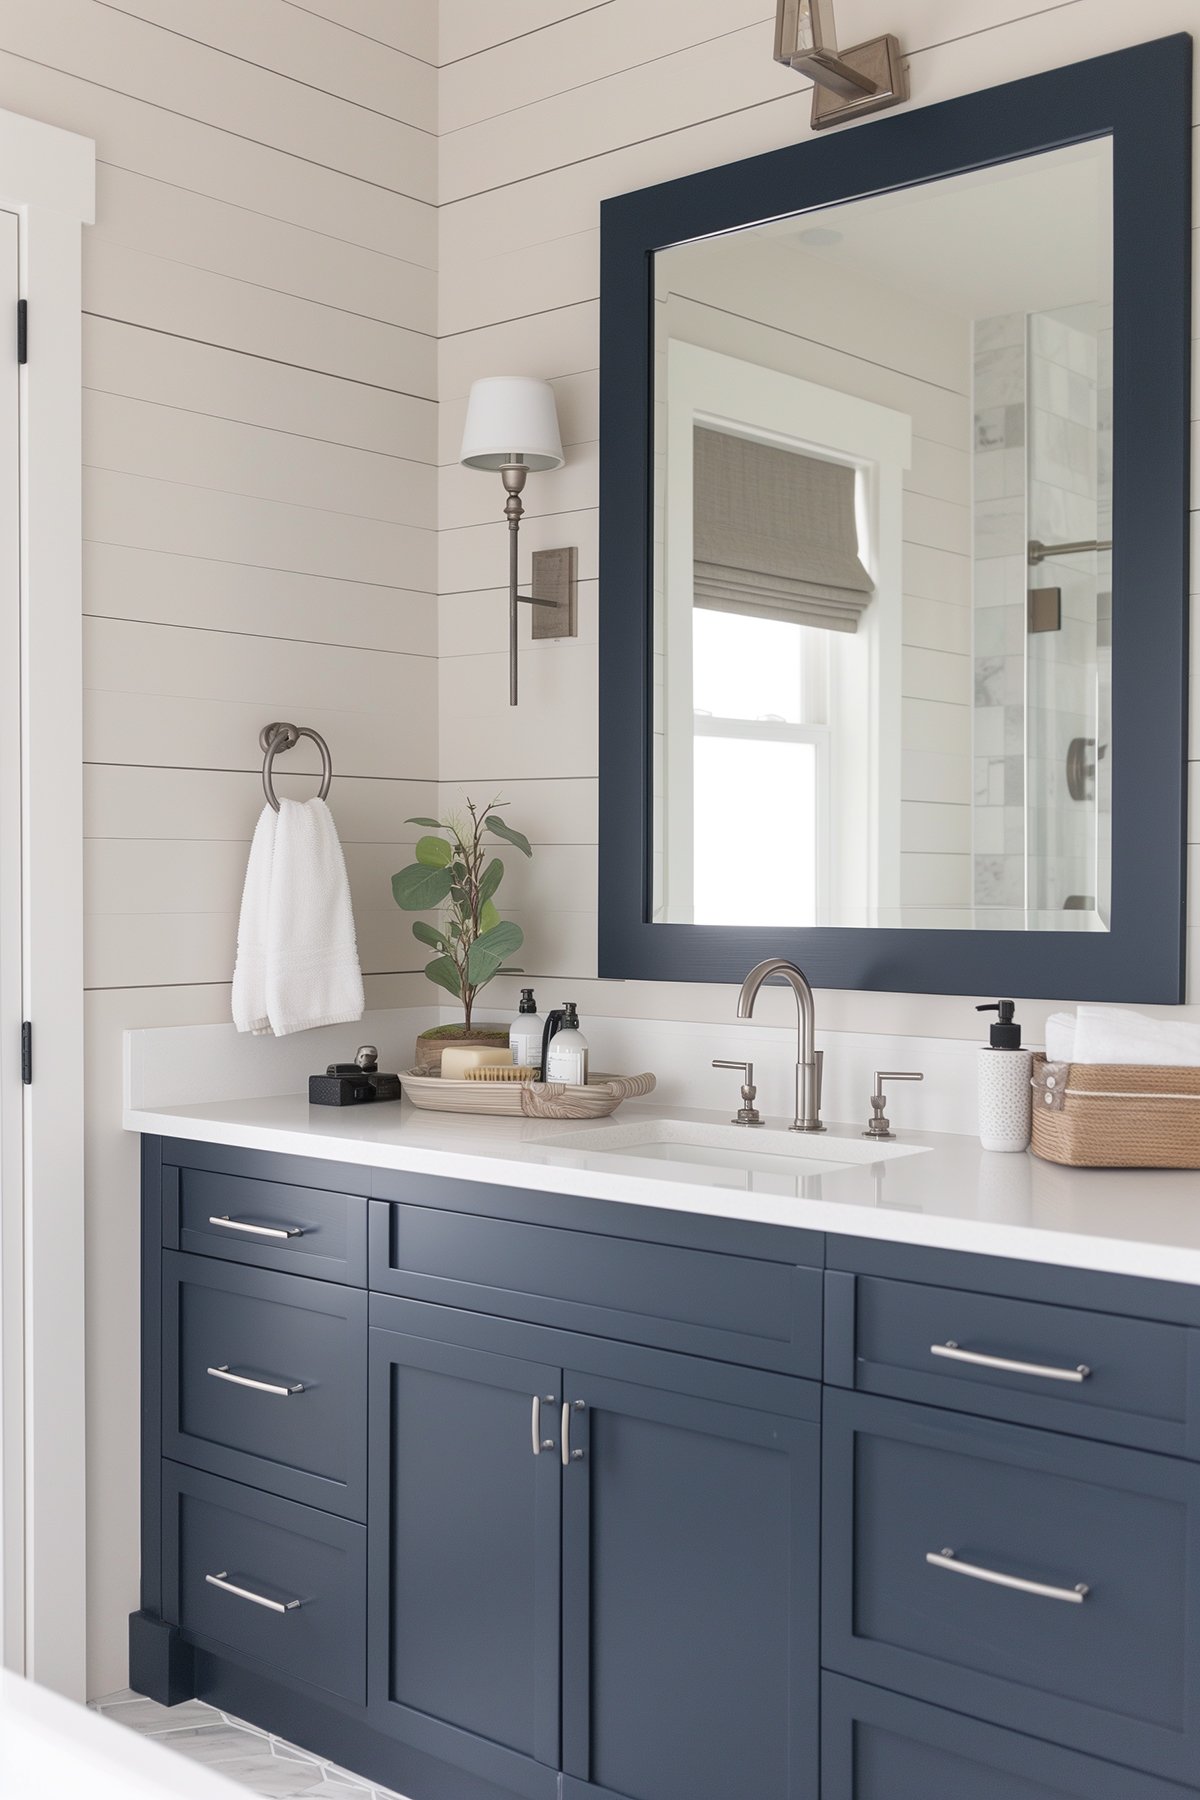 Modern bathroom with vanity and mirror painted Sherwin Williams Naval. The walls have off-white shiplap.